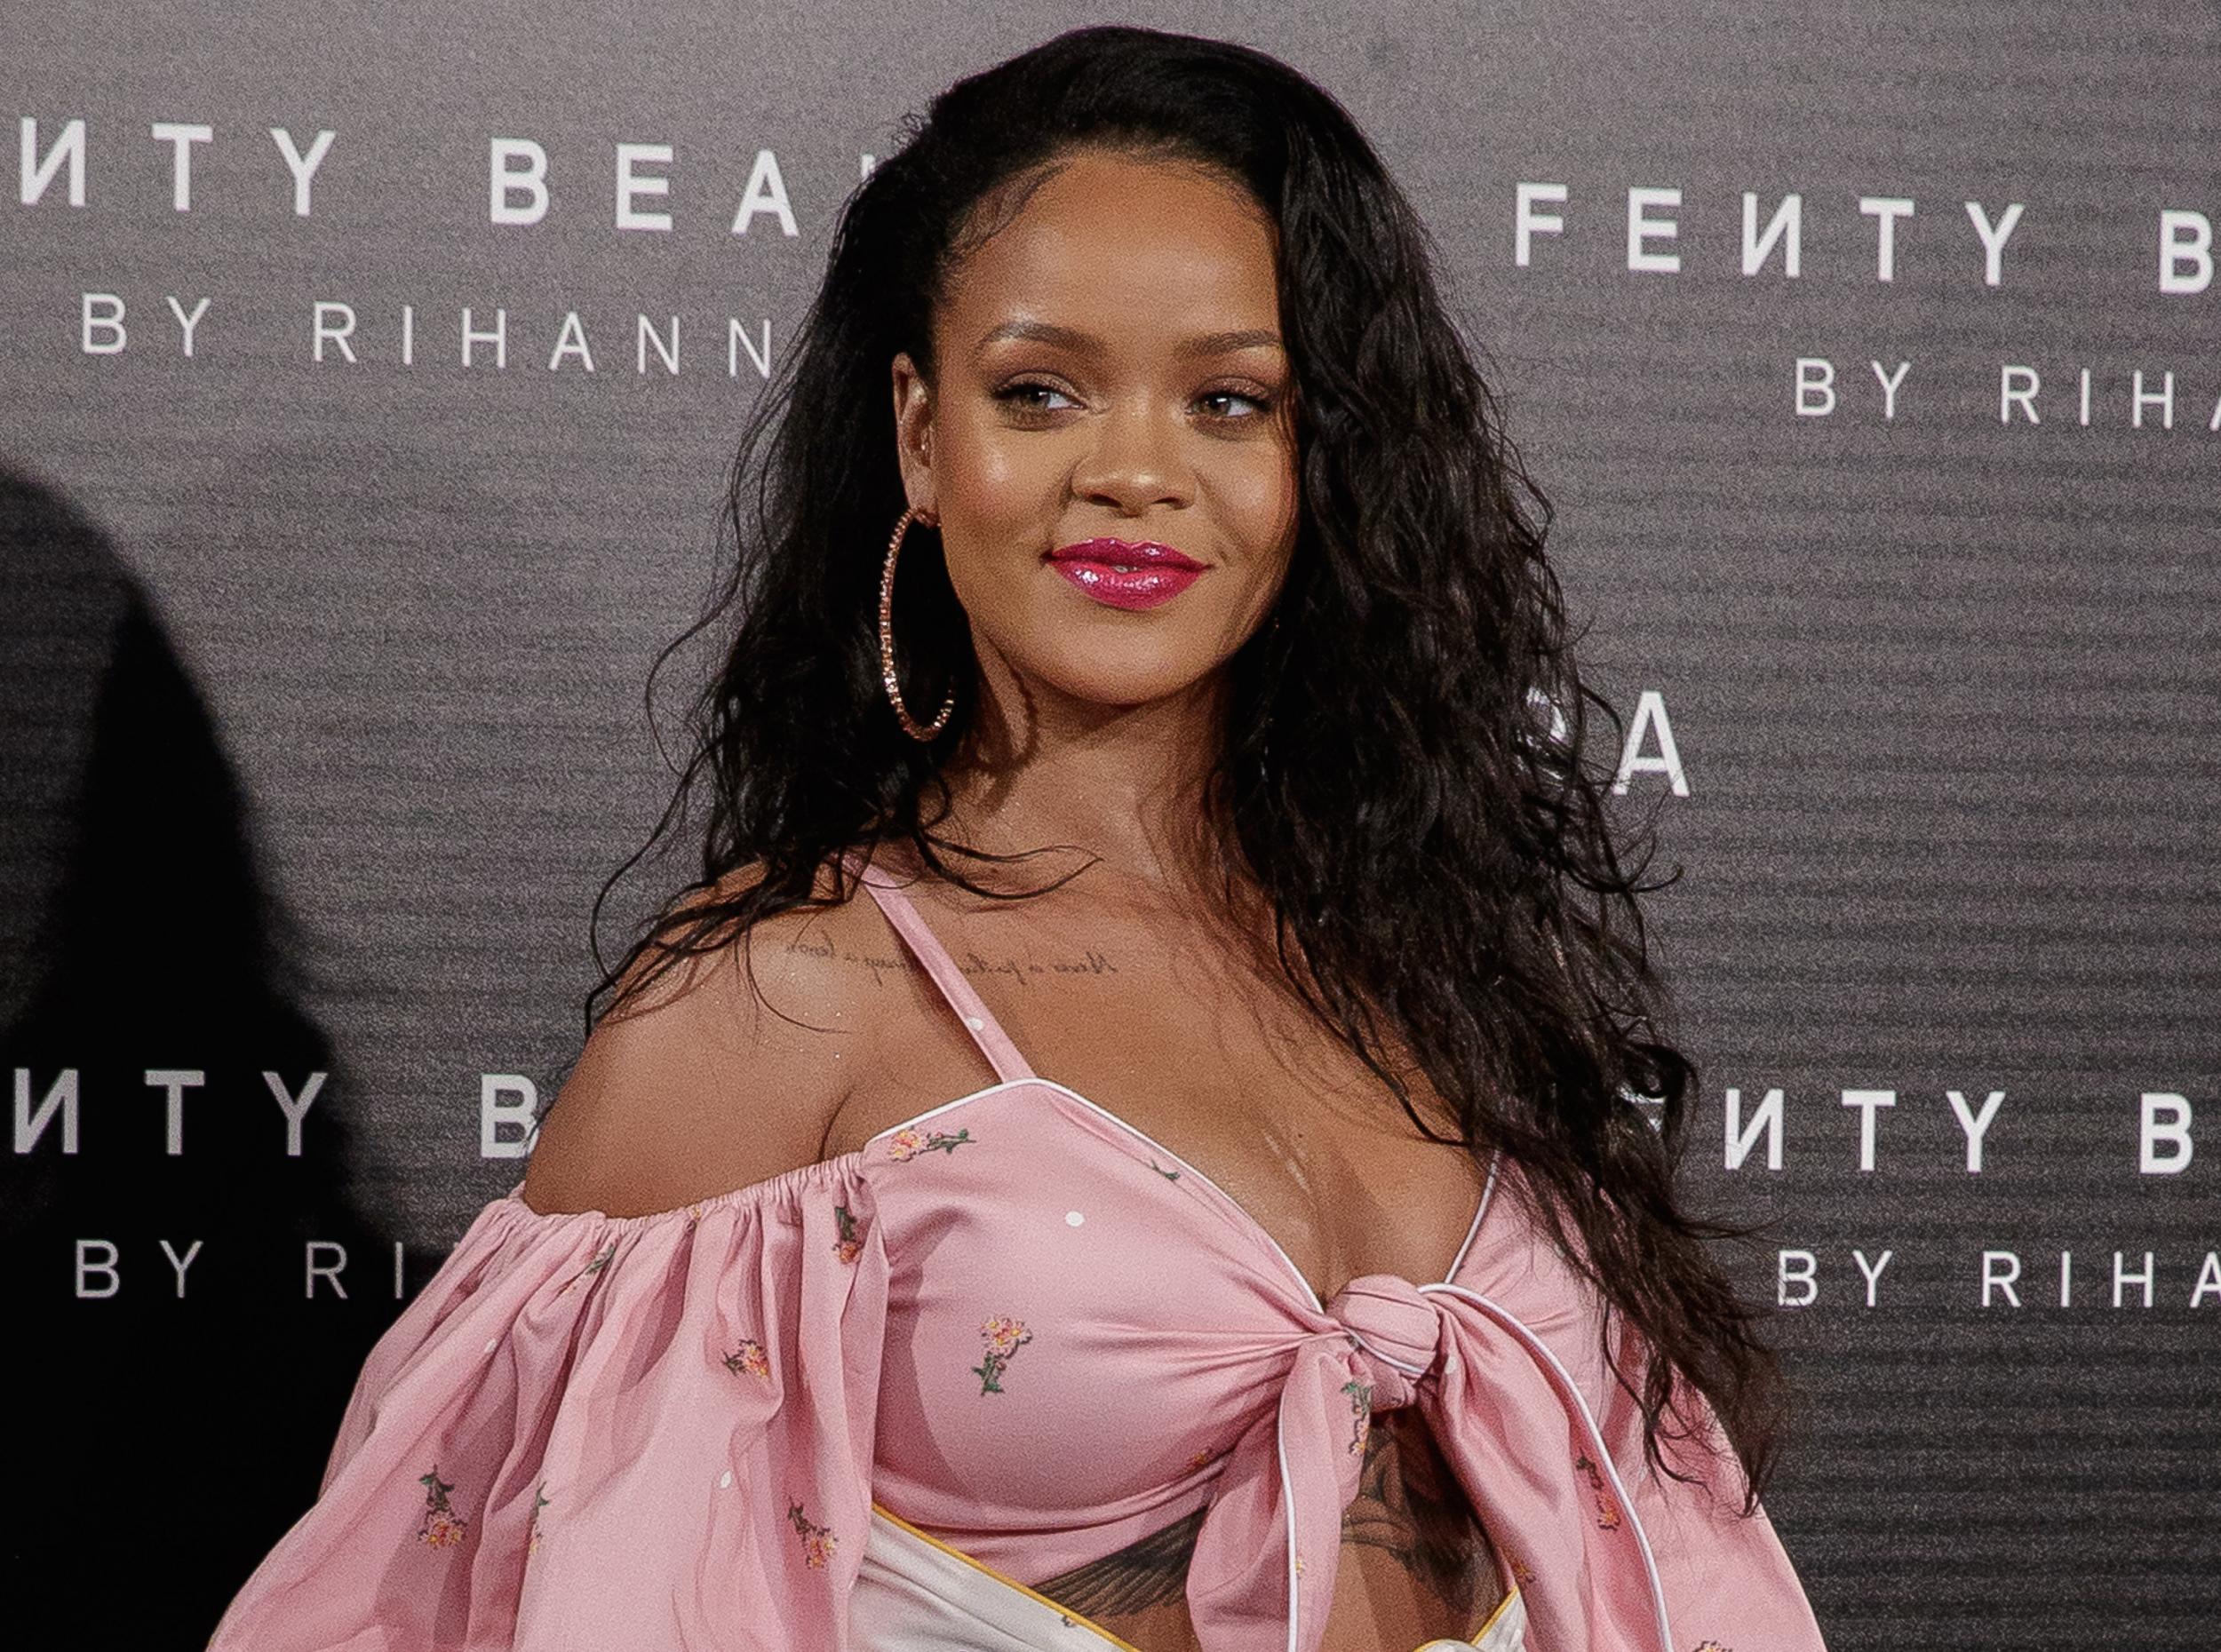 Fans are hoping for new music from Rihanna this year